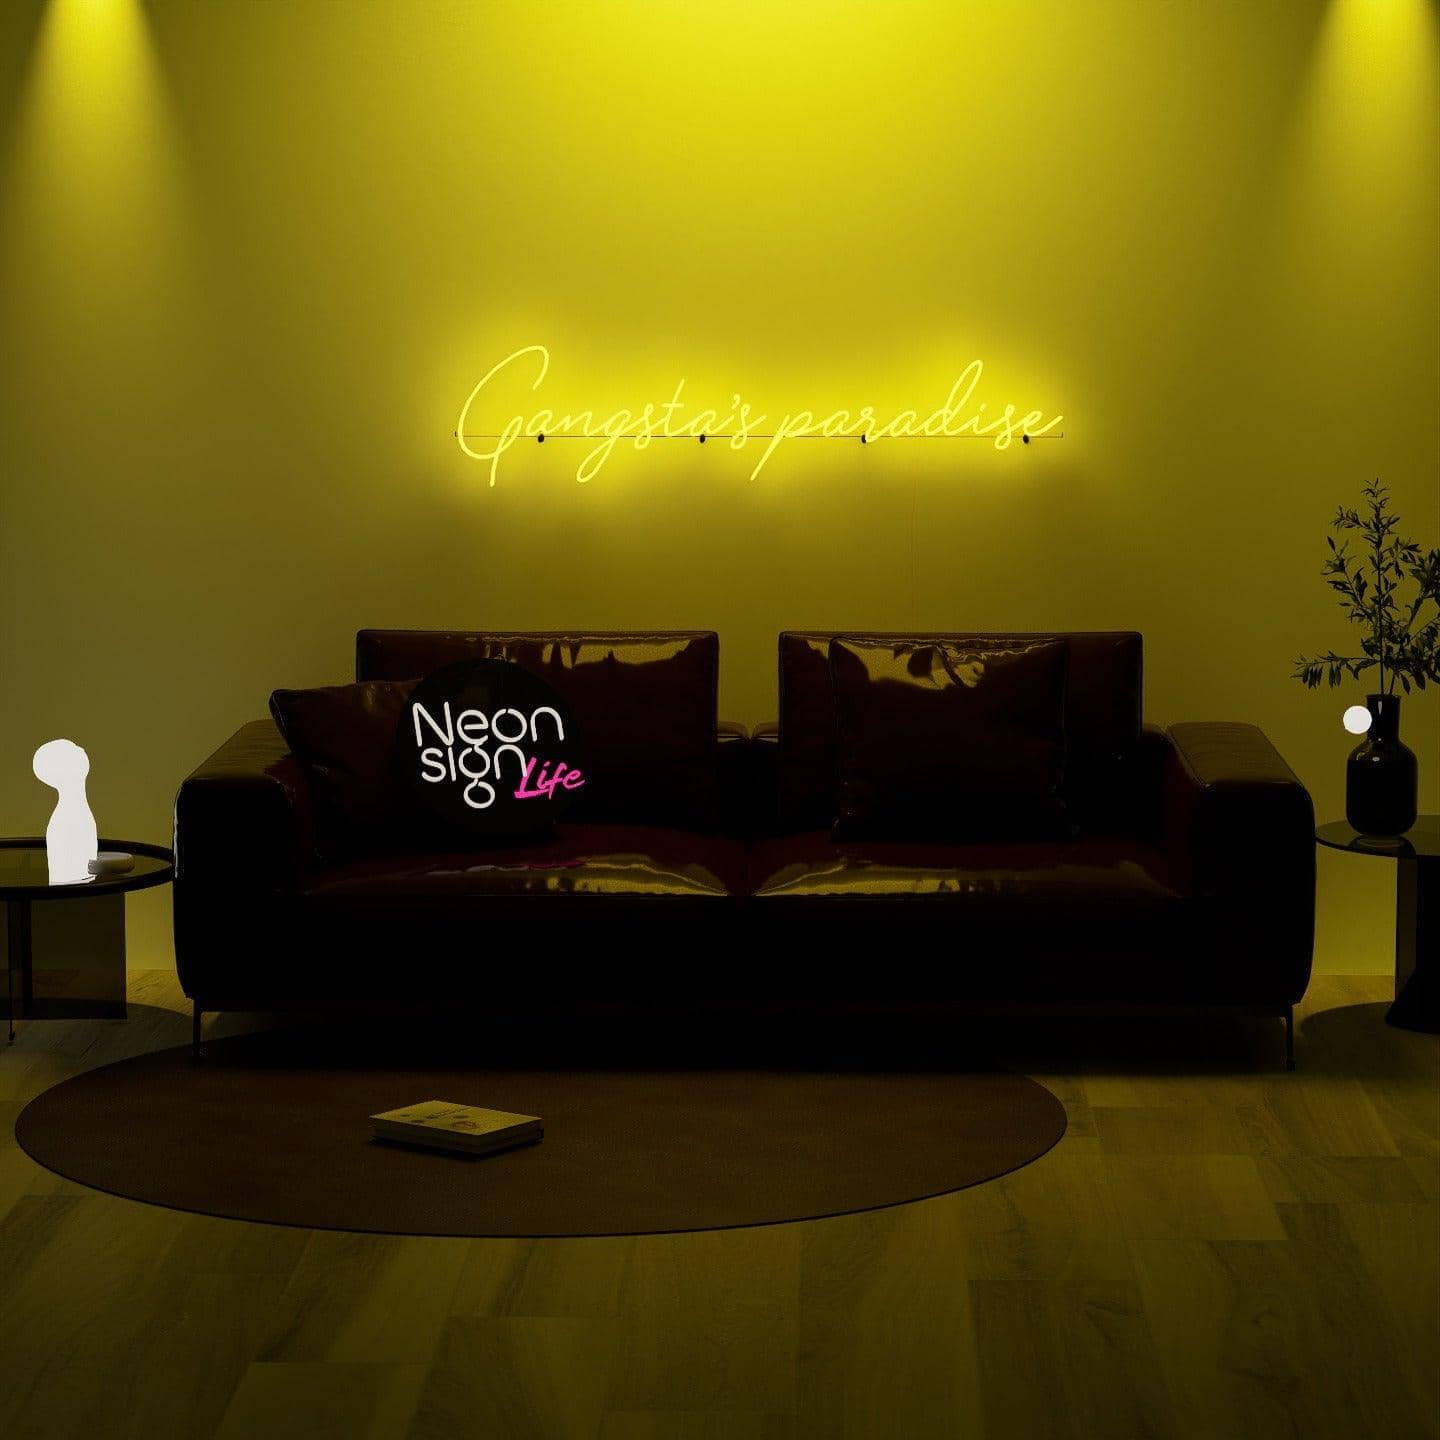 golden-neon-lights-illuminated-at-night-and-hung-on-the-wall-for-display-gangsta's-paradise